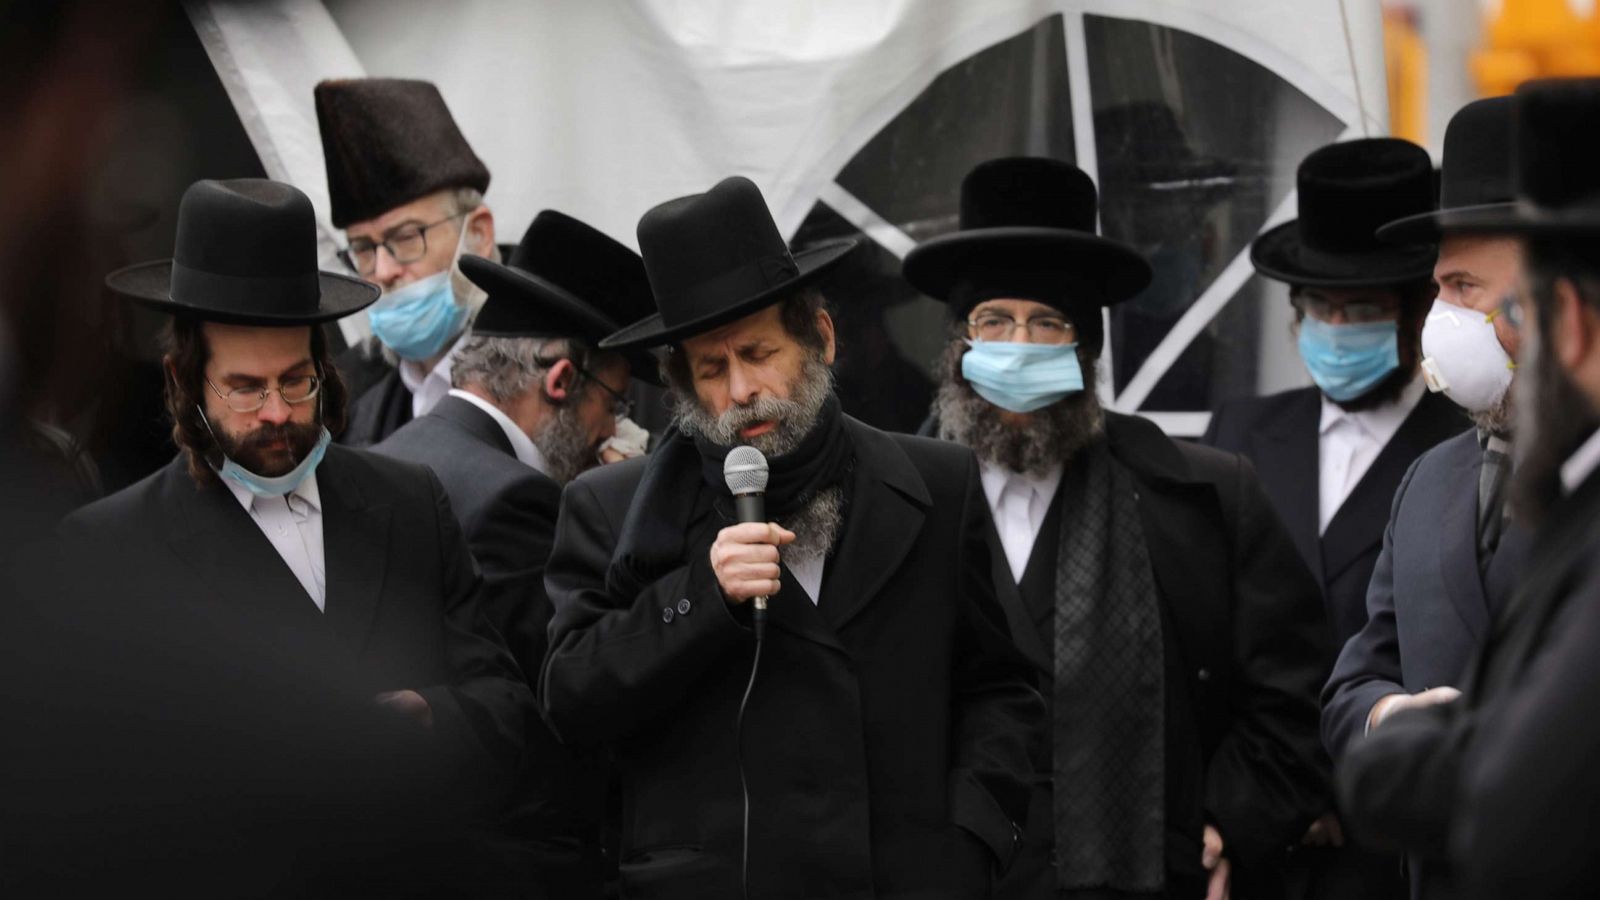 As Passover nears, a struggle between community and coronavirus for some  Orthodox Jews - ABC News